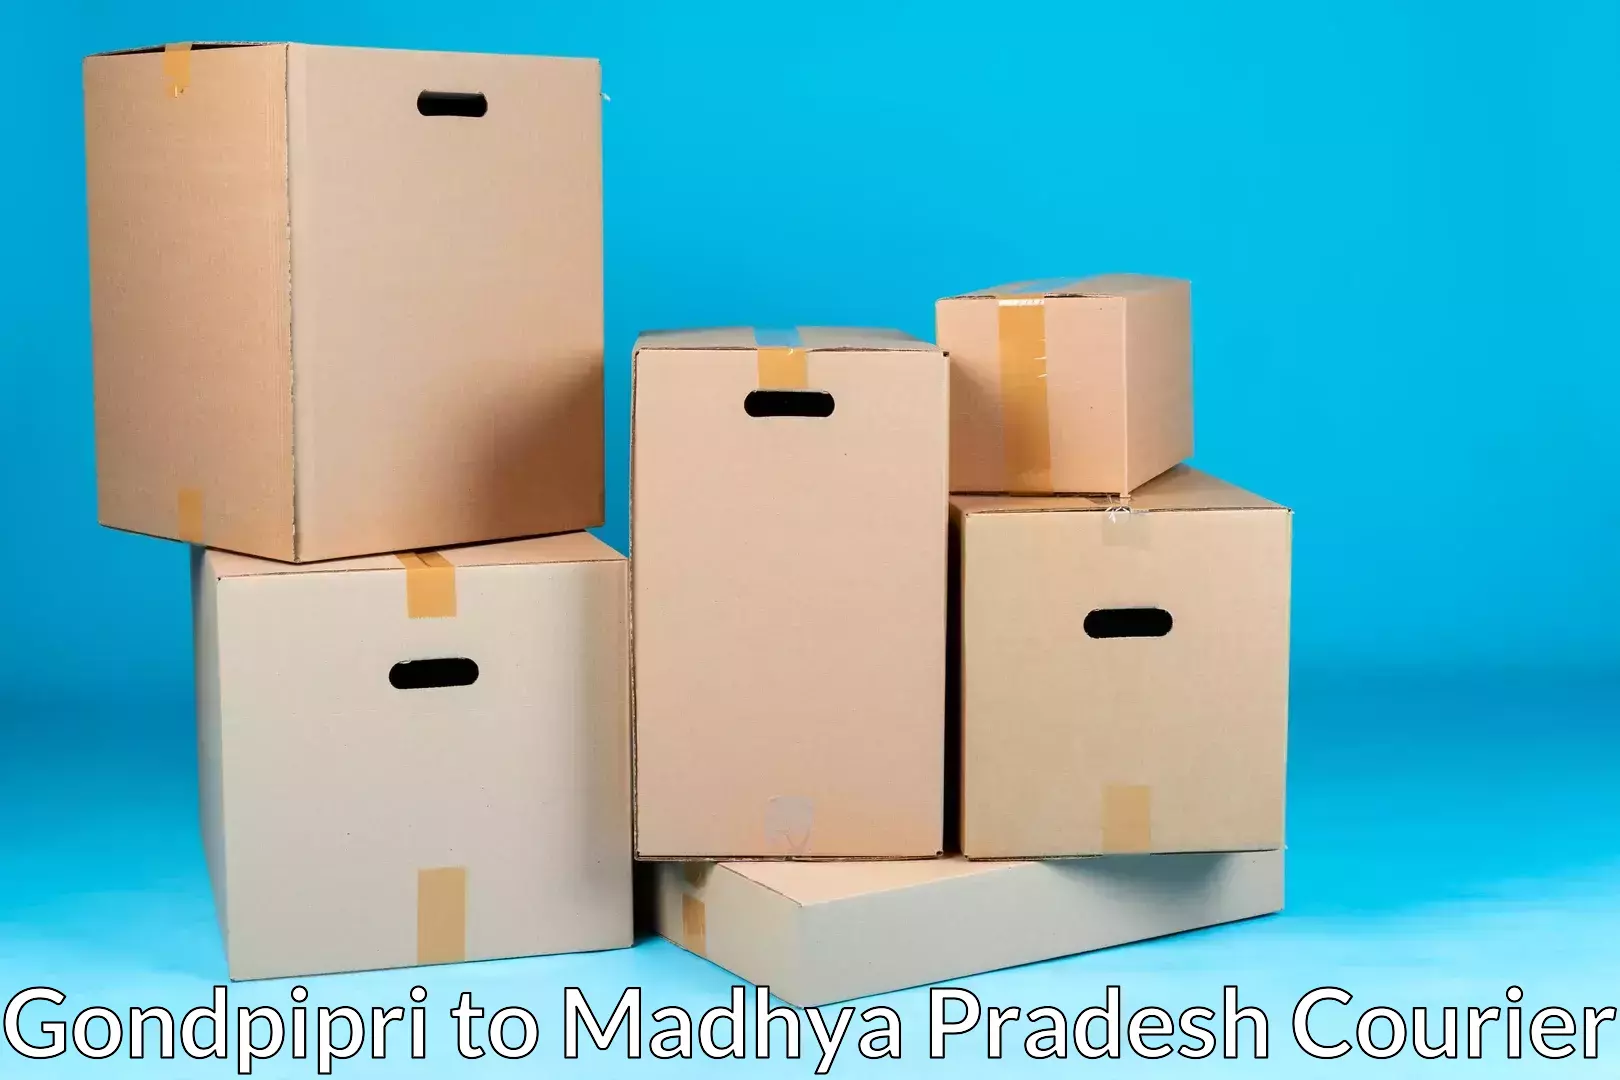 Home moving service in Gondpipri to Bhopal